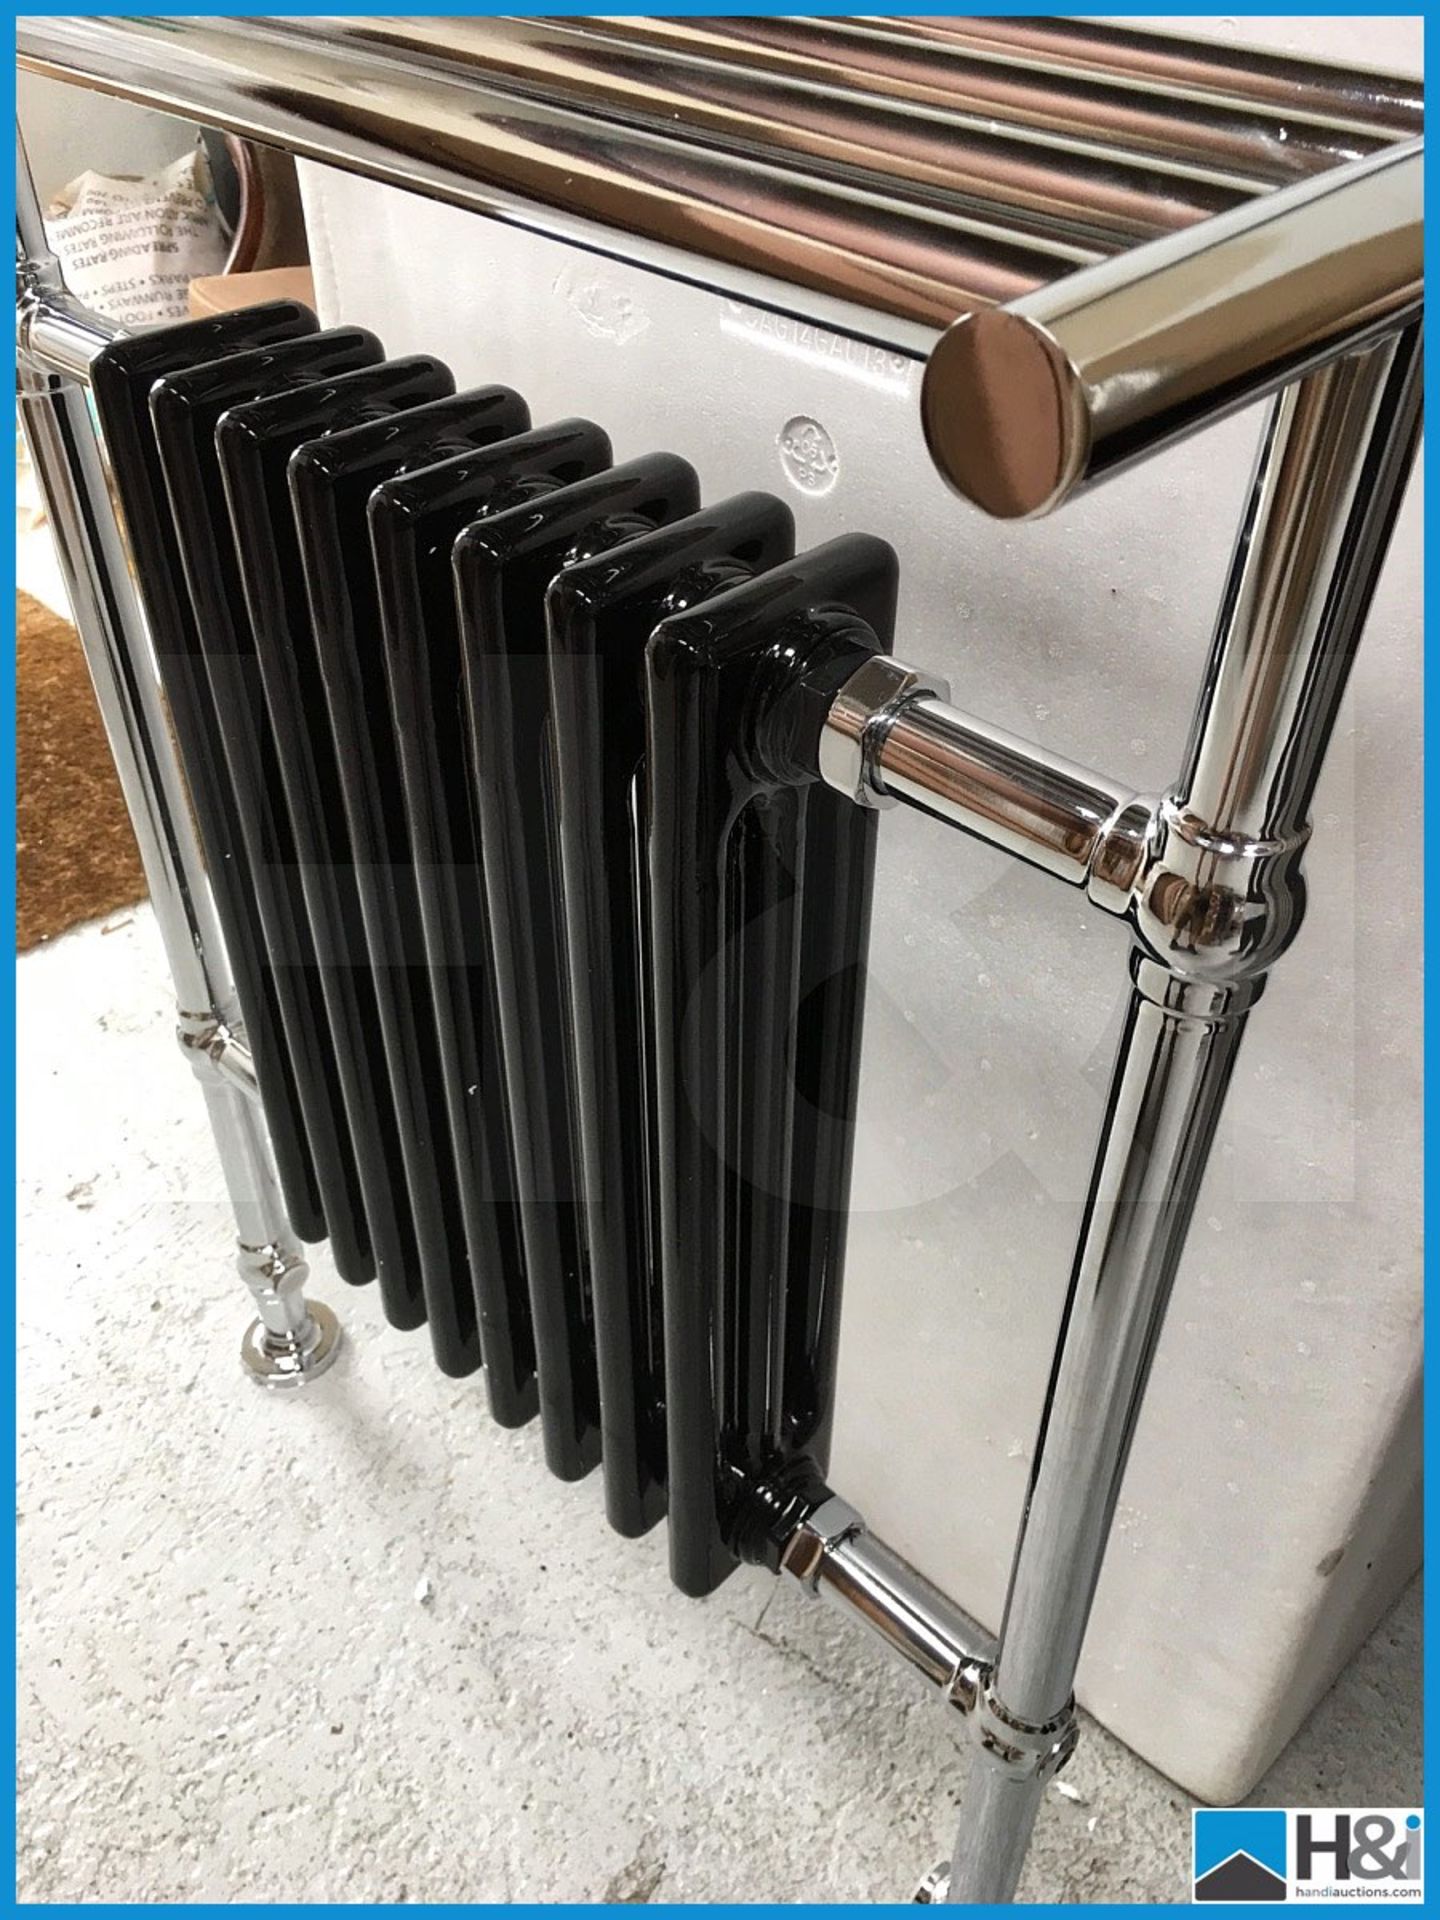 Designer centre column black traditional radiator with polished chrome rails. New and boxed. - Image 5 of 6